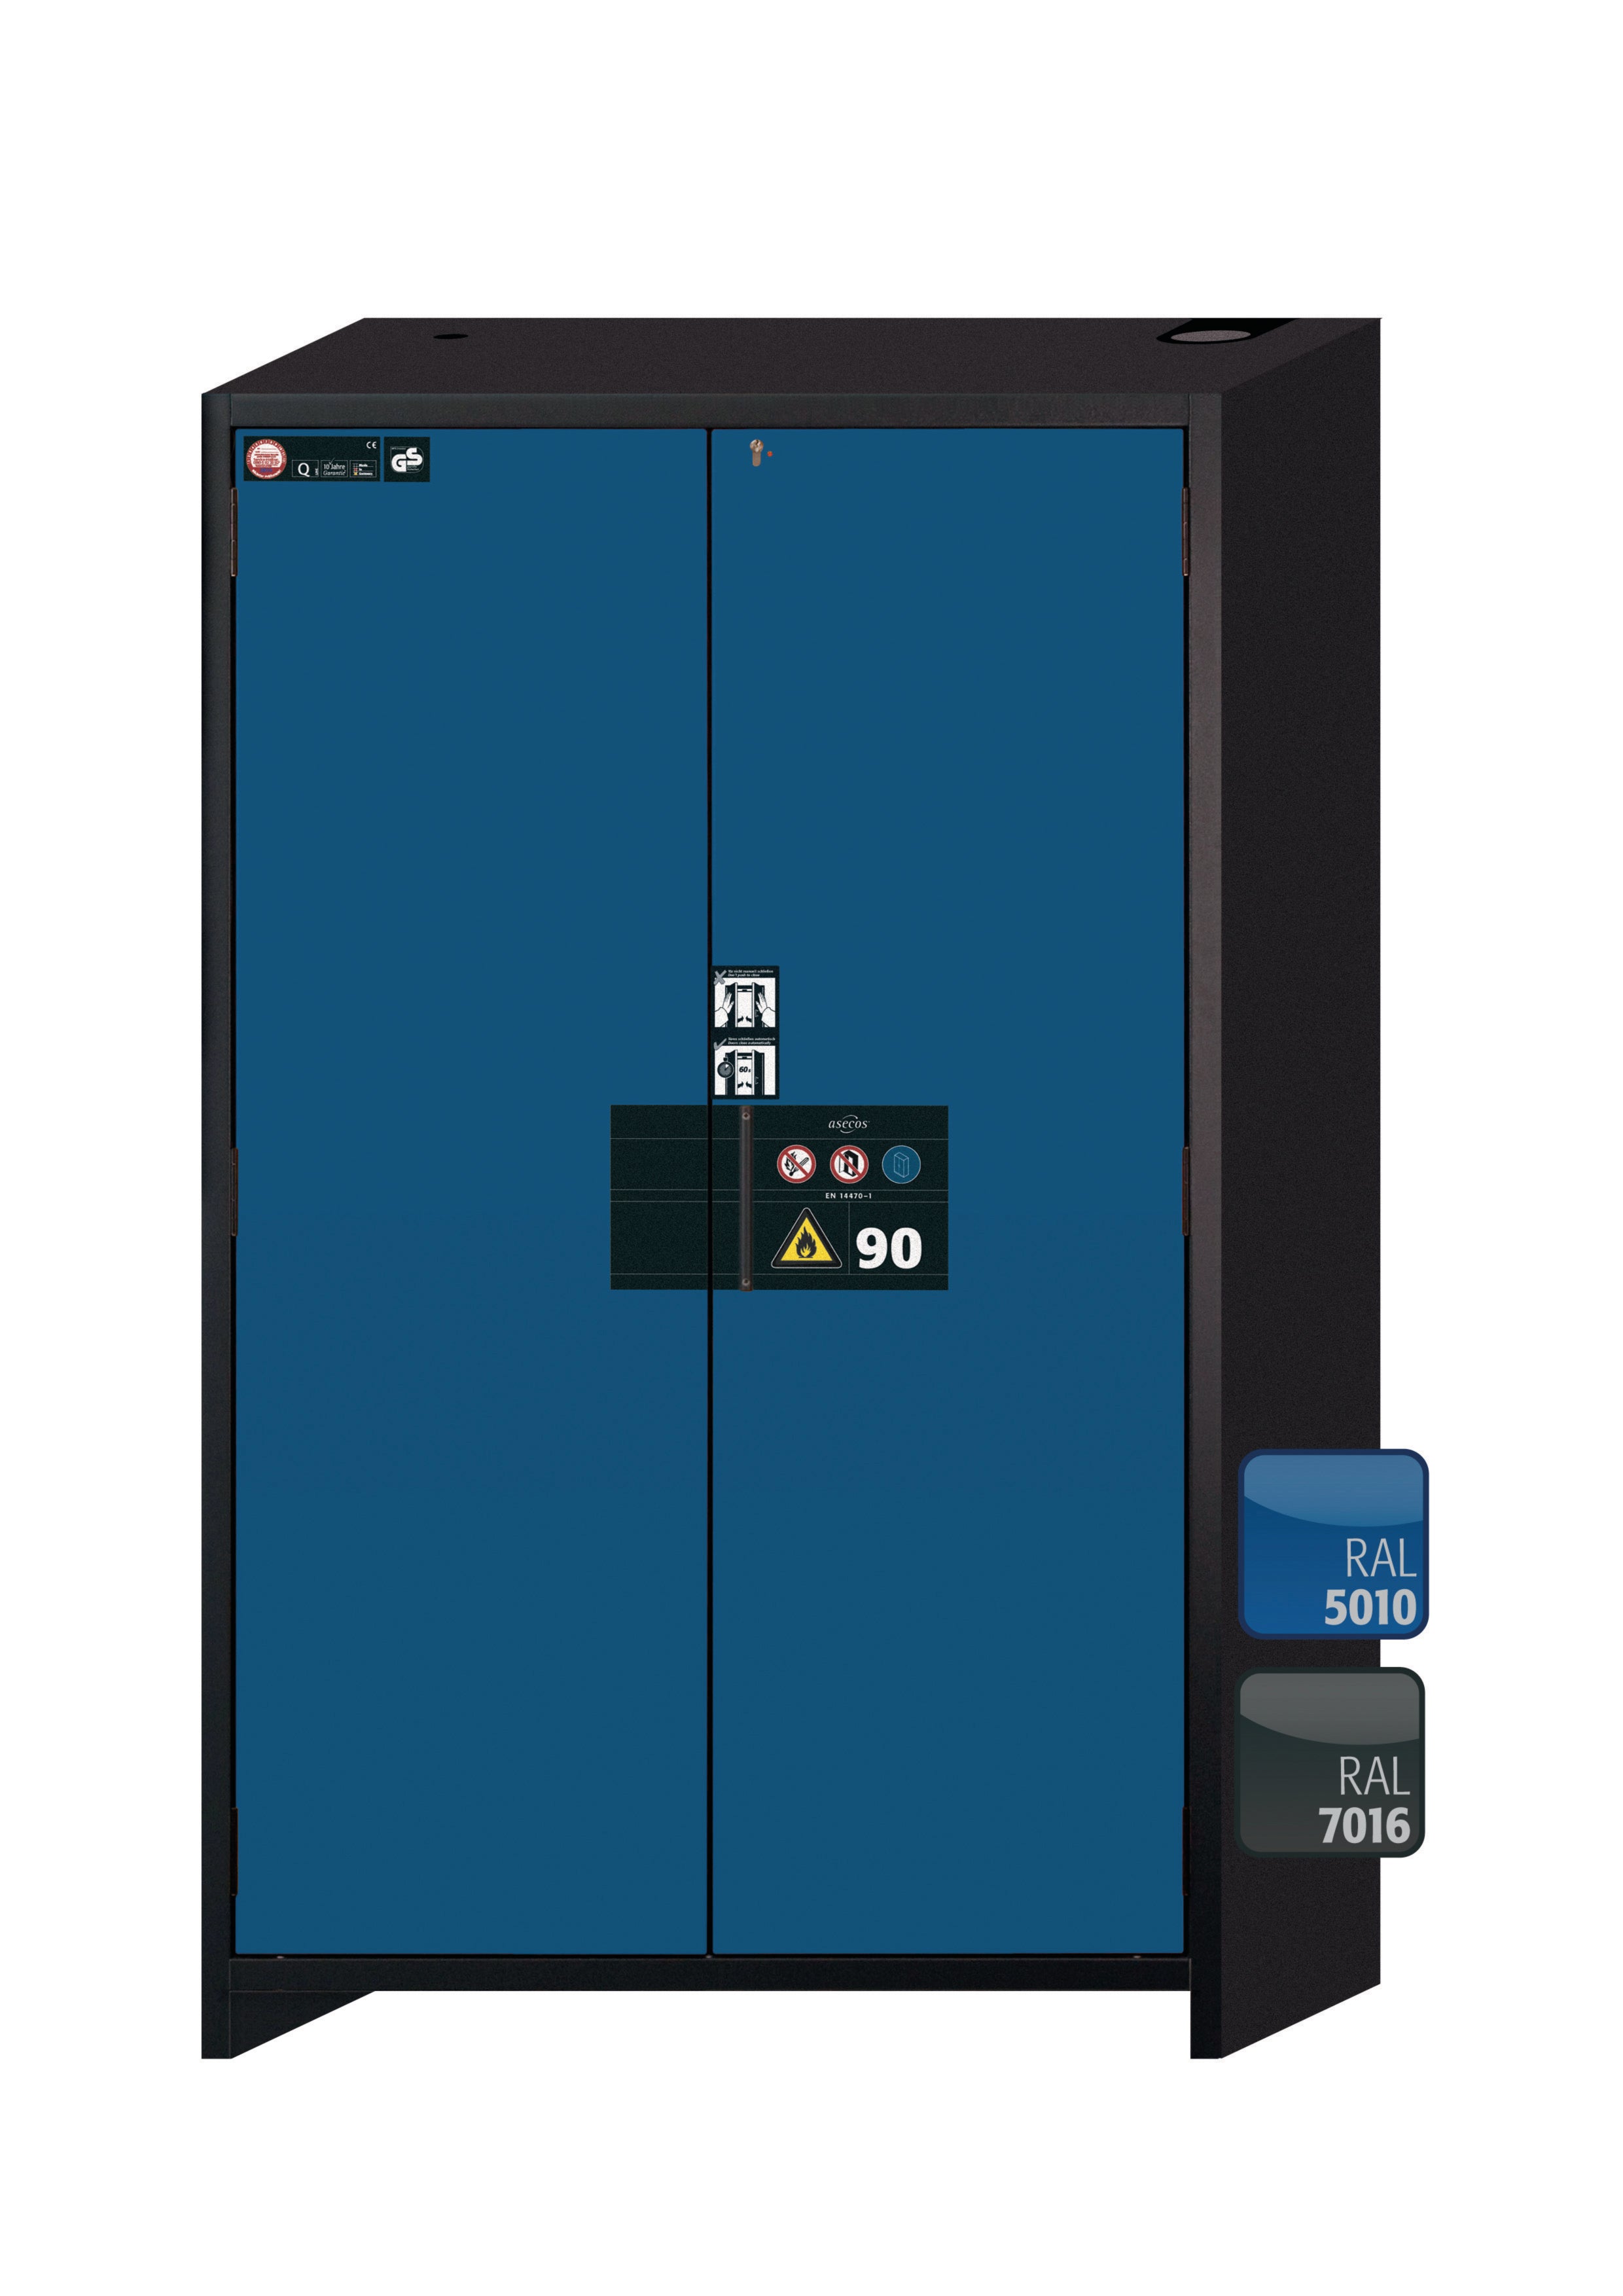 Type 90 safety storage cabinet Q-PEGASUS-90 model Q90.195.120.WDAC in gentian blue RAL 5010 with 2x shelf standard (stainless steel 1.4301),